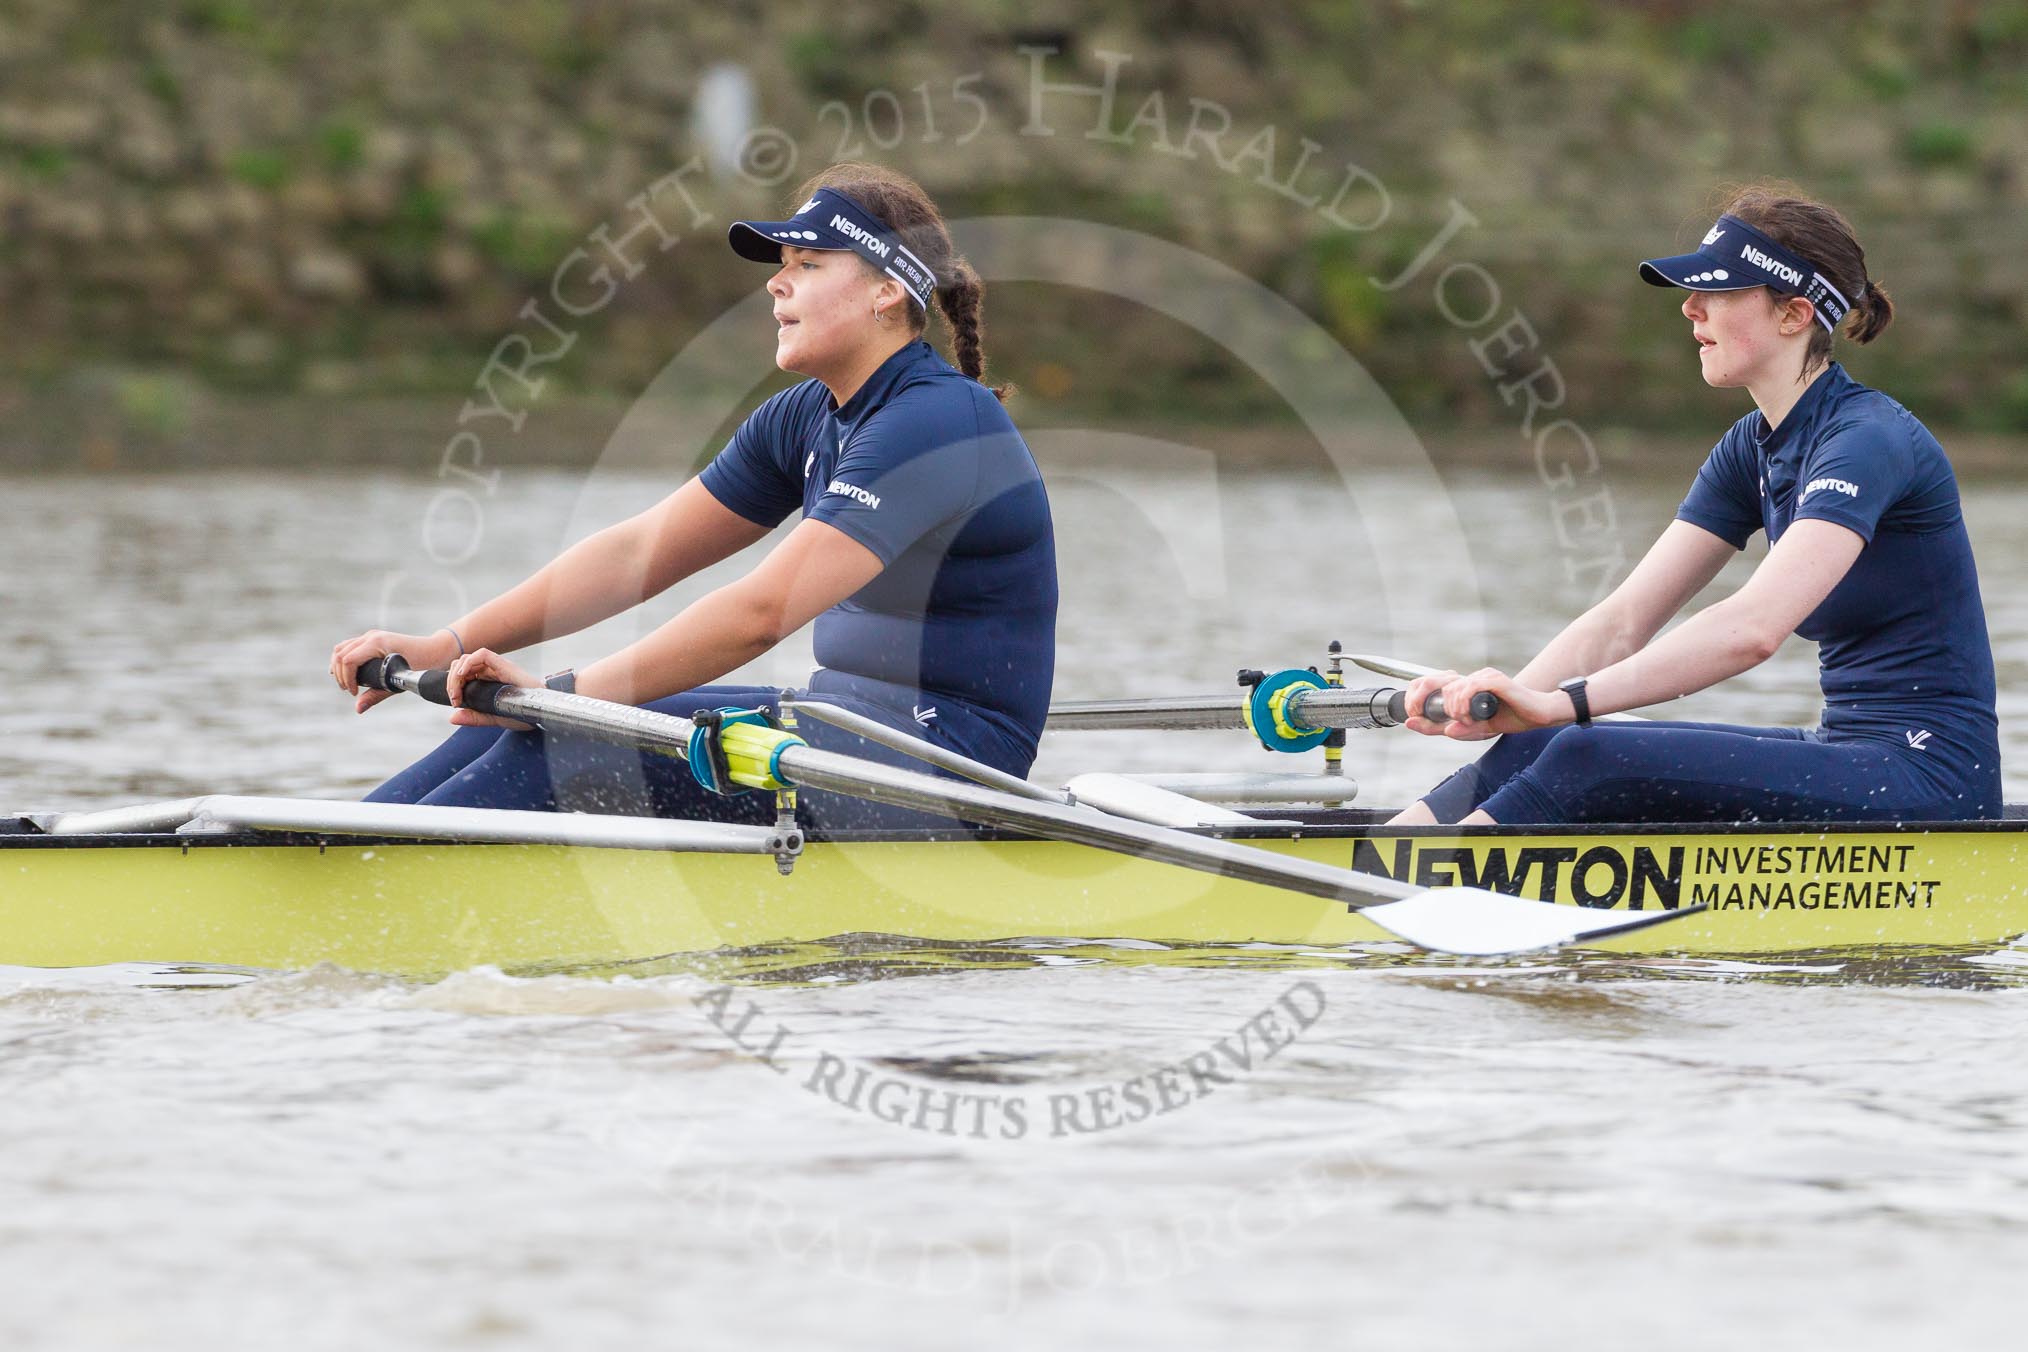 The Boat Race season 2016 - Women's Boat Race Trial Eights (OUWBC, Oxford): "Charybdis", here 3-Lara Pysden, 2-Christina Fleischer.
River Thames between Putney Bridge and Mortlake,
London SW15,

United Kingdom,
on 10 December 2015 at 12:20, image #171